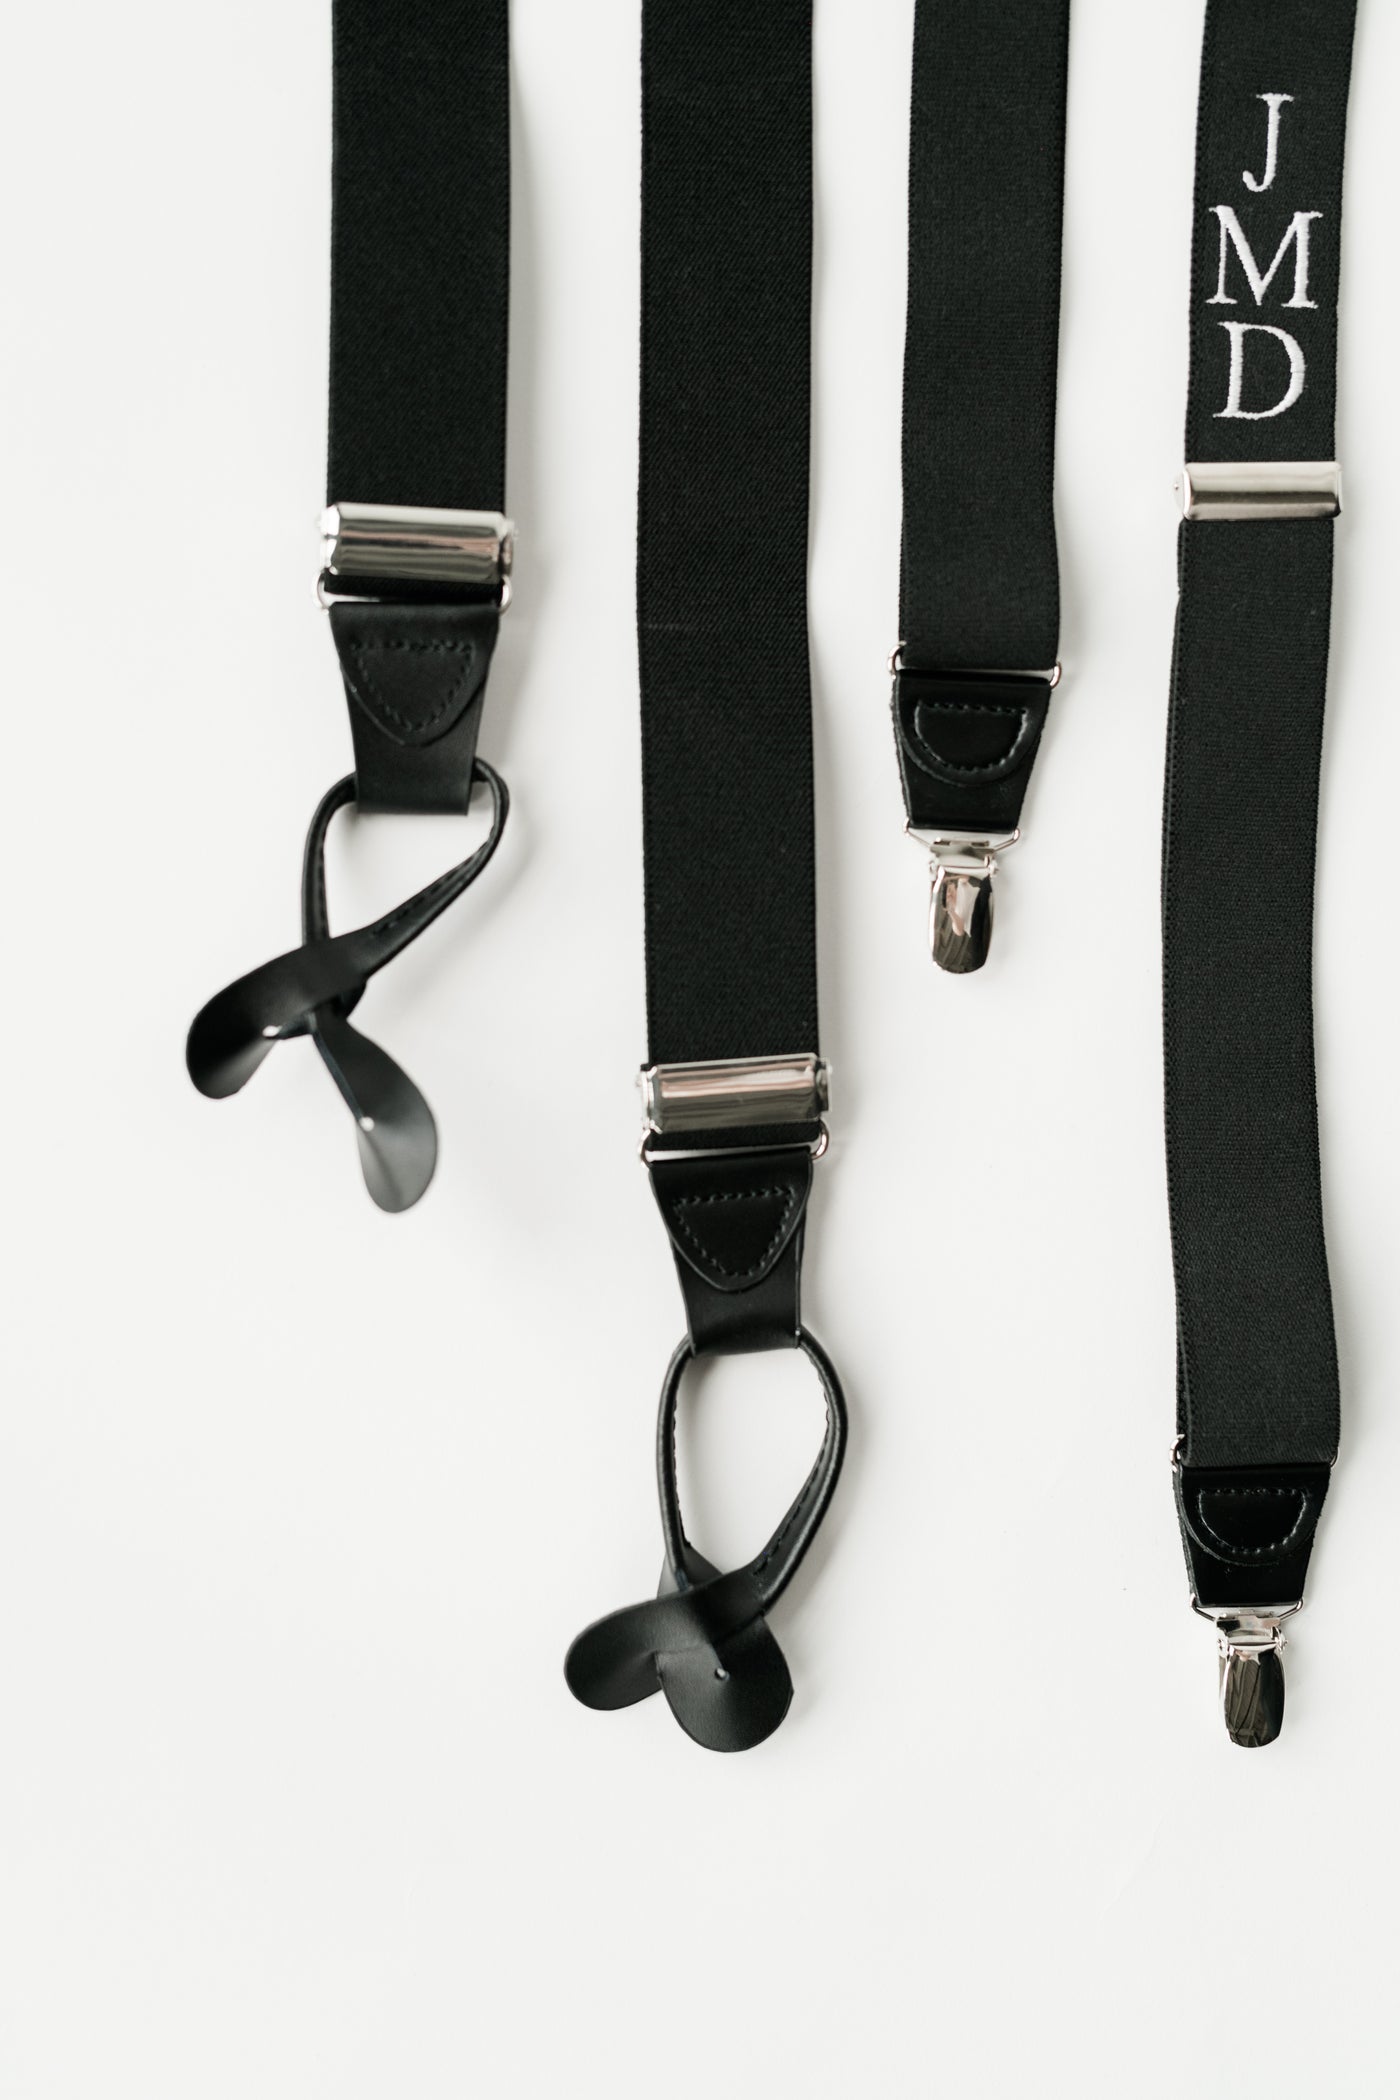 clip end and button end suspenders 